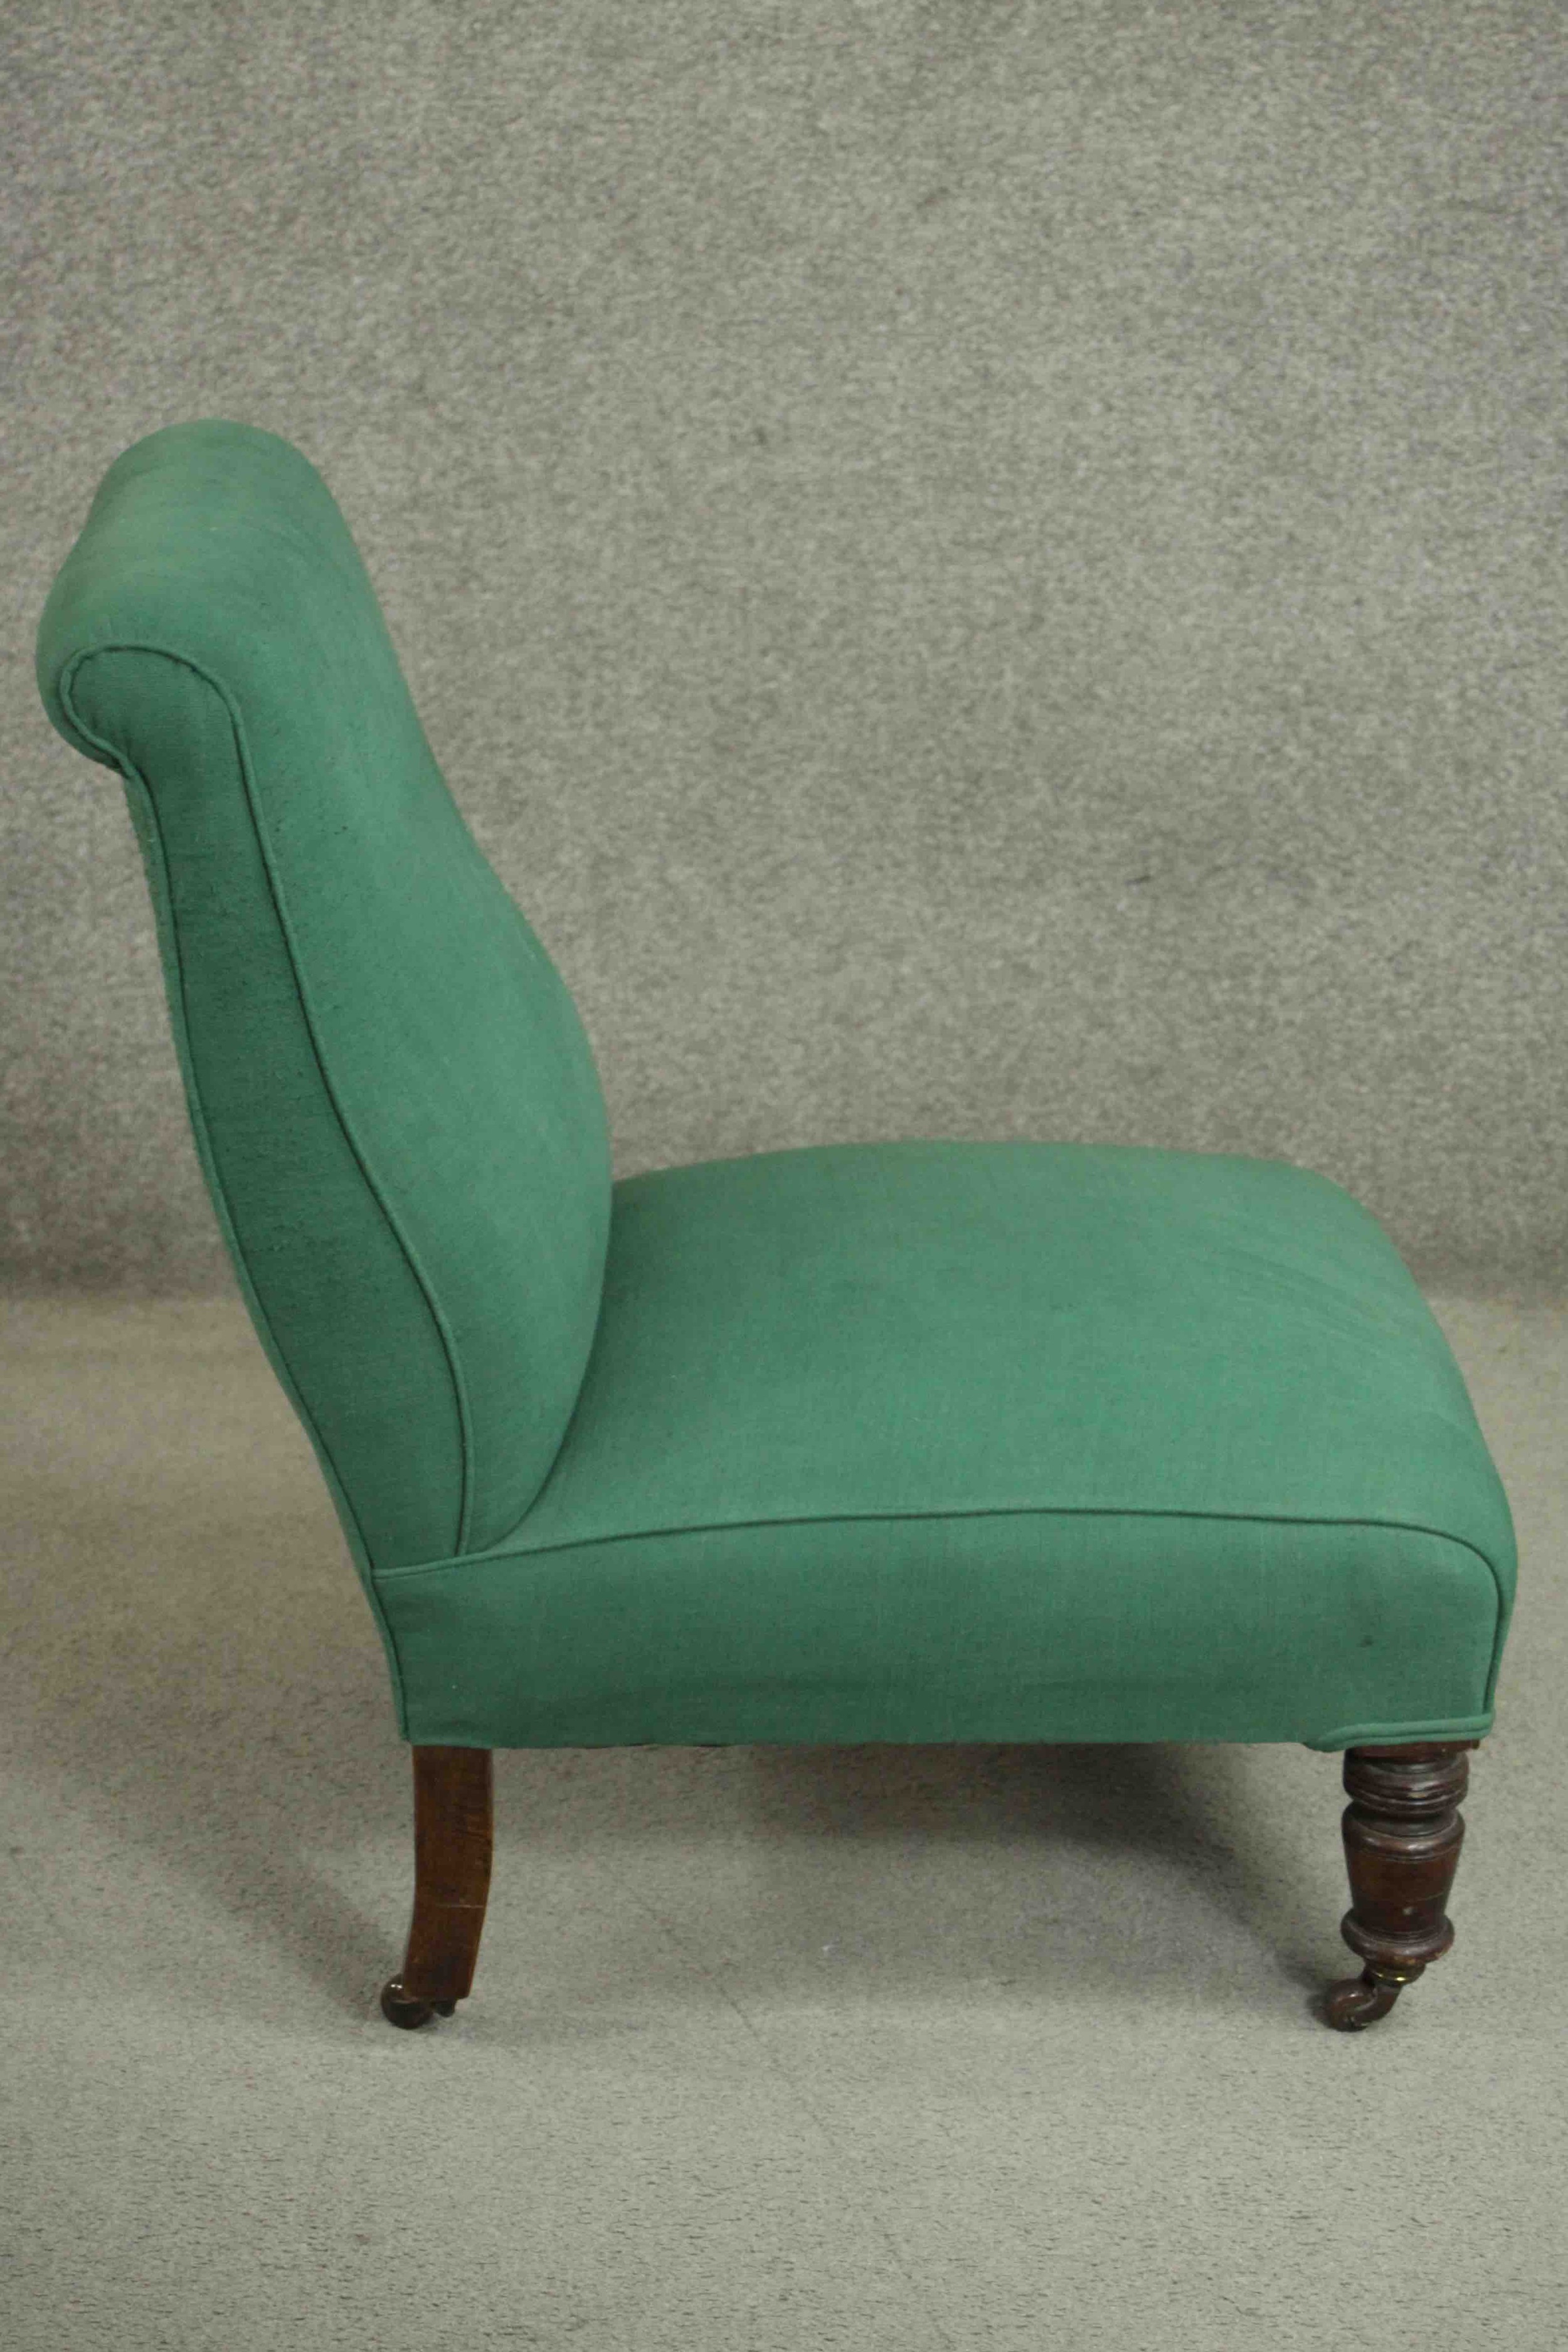 A Victorian mahogany nursing chair, upholstered in green fabric, on ring turned legs. H.85 W.61 D. - Image 3 of 5